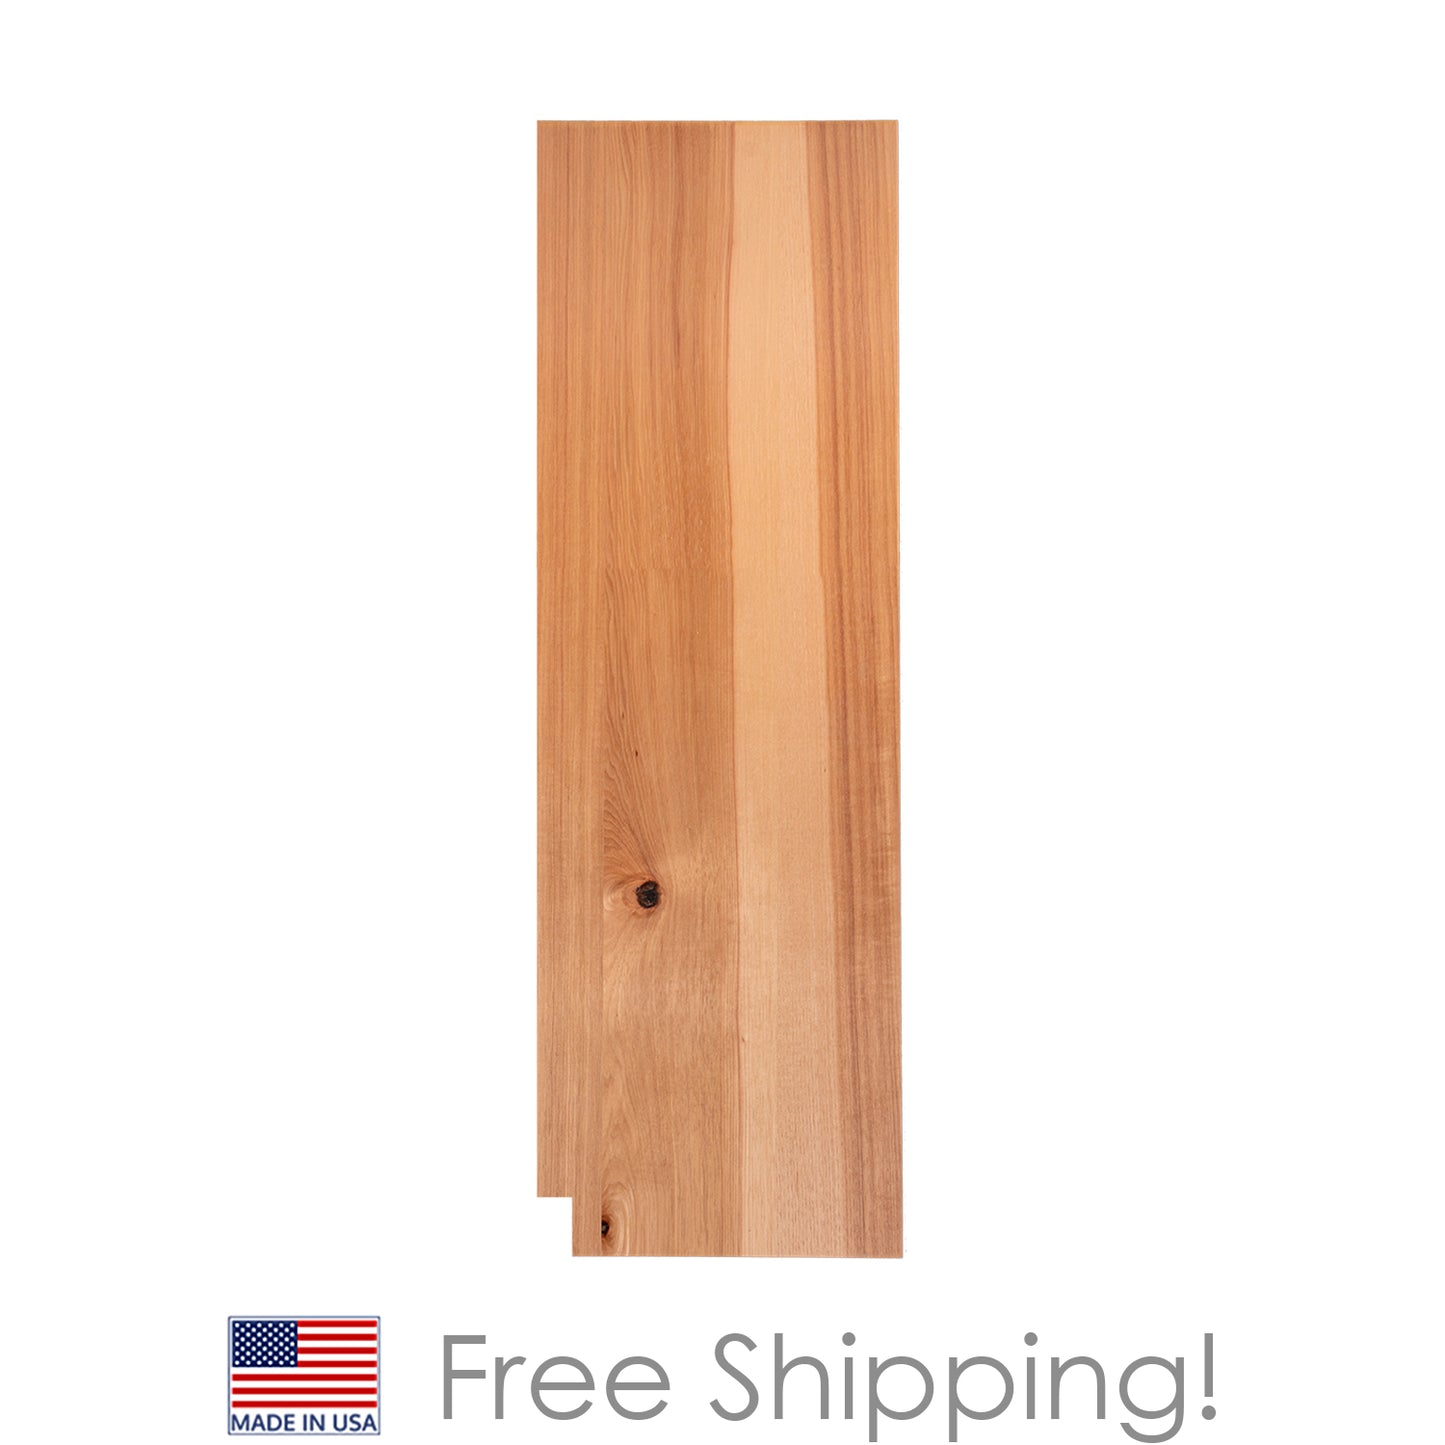 Quicklock RTA (Ready-to-Assemble) Rustic Hickory .25"X23.25"X90" Pantry End Panel - Right Side